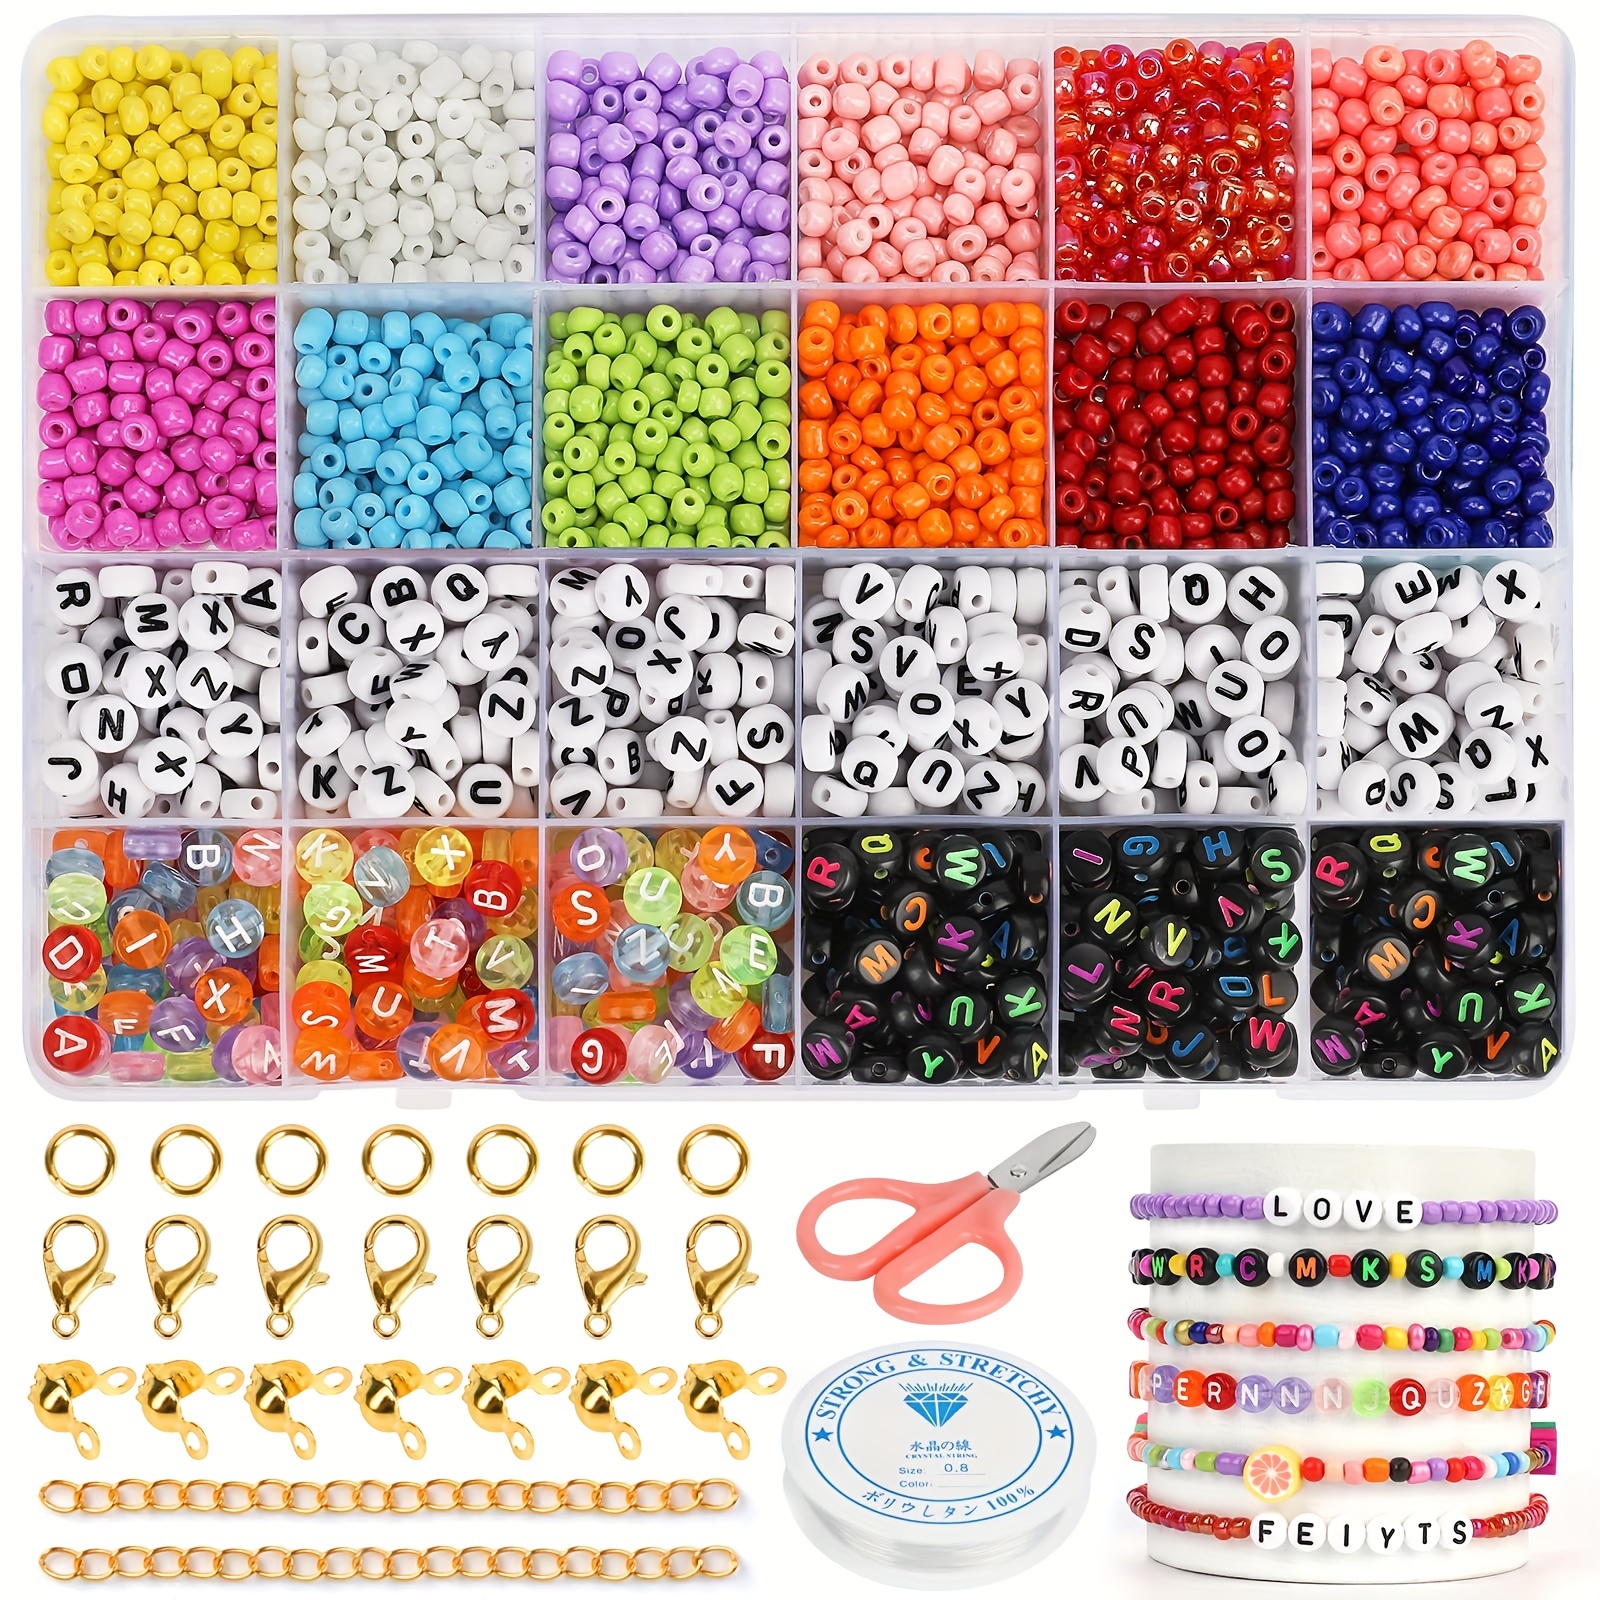 17000pcs 2mm Glass Seed Beads for Jewelry Making Kit, Small Beads  Friendship Bracelets Making Kits, Tiny Waist Beads Kit with Letter Beads,  DIY Art Craft Girls Gifts